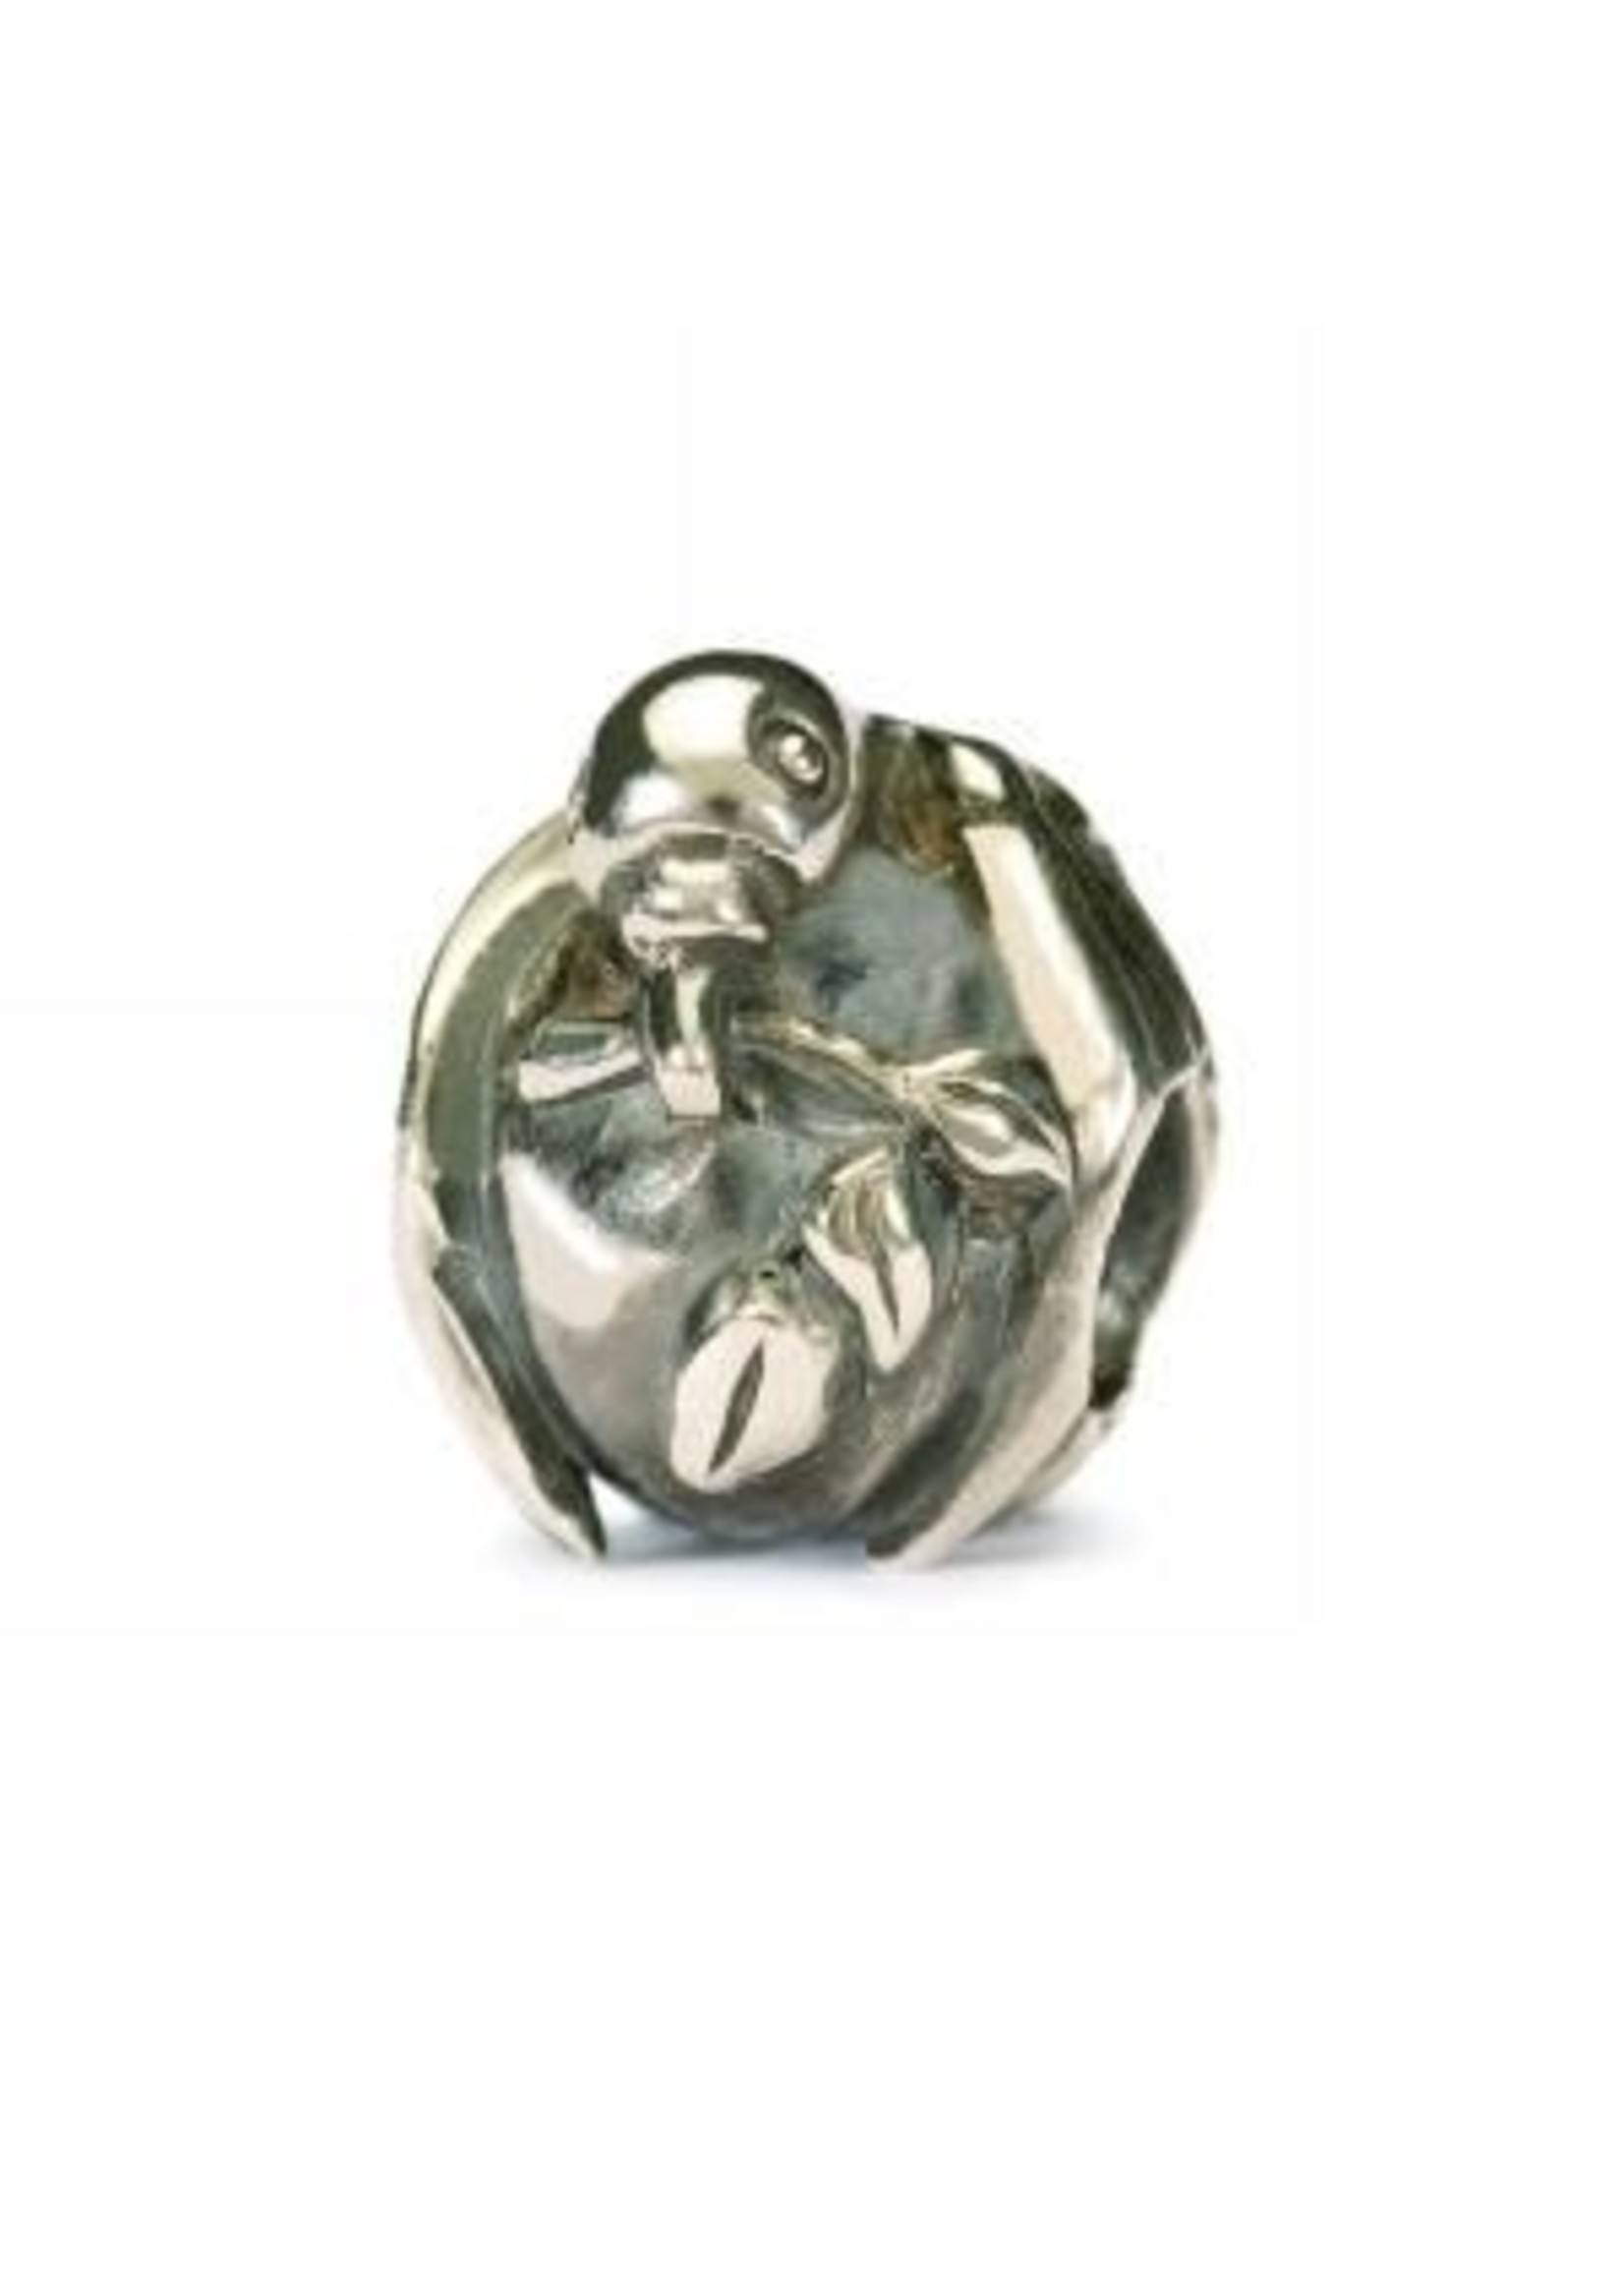 Vintage & Occasion trollbeads retired vrede